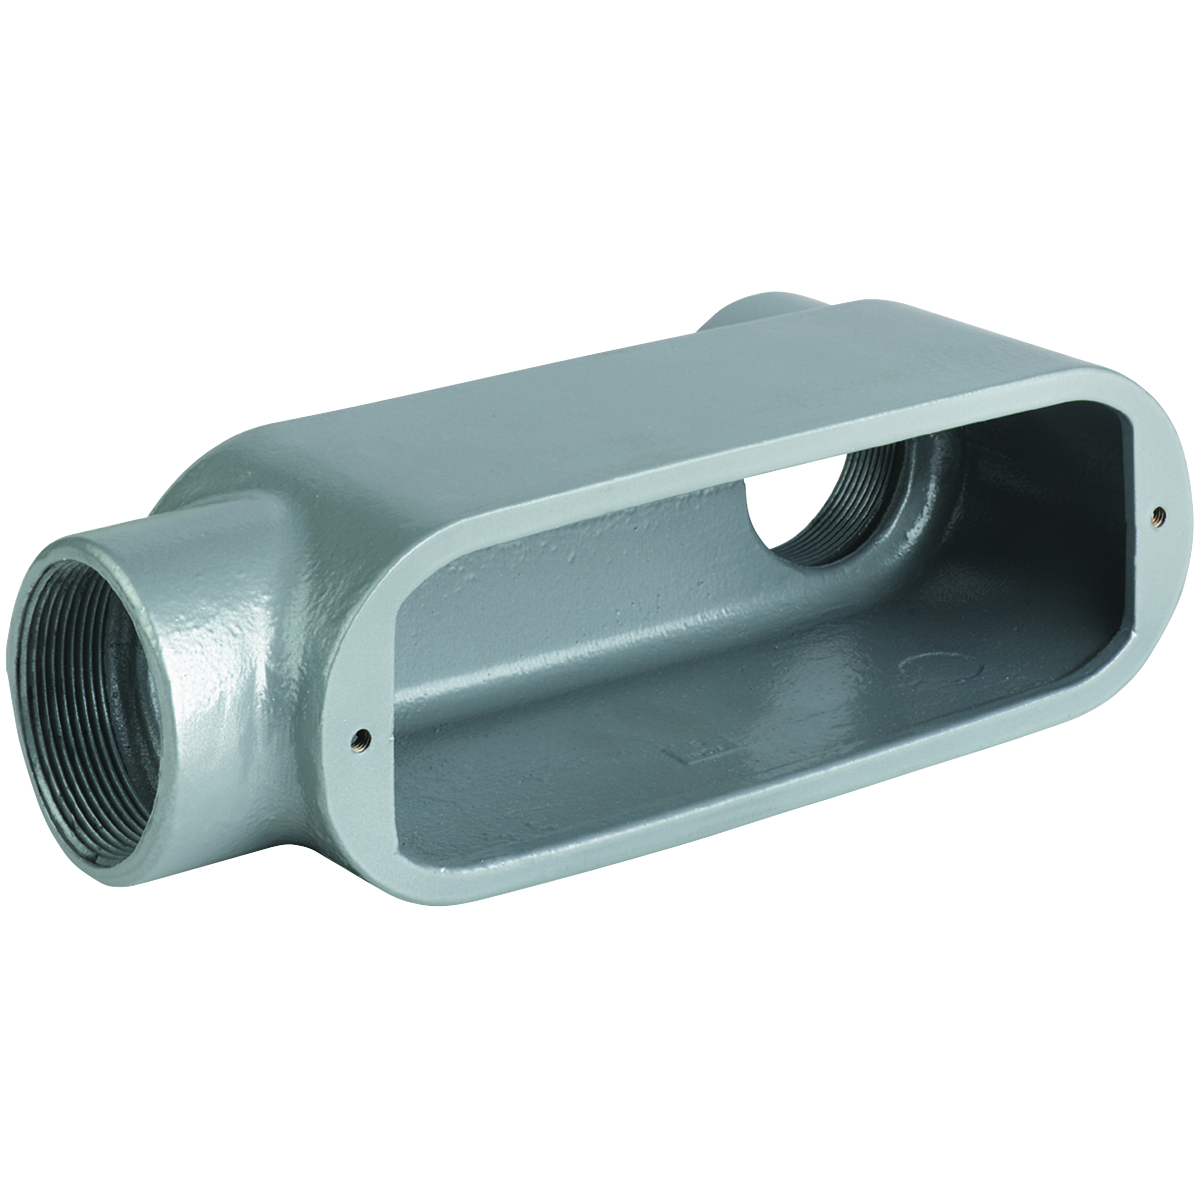 O SERIES/DURALOY 5 SERIES - ALUMINUM CONDUIT BODY - LB TYPE - HUB SIZE1/2 INCH - VOLUME 4.0 CUBIC INCHES